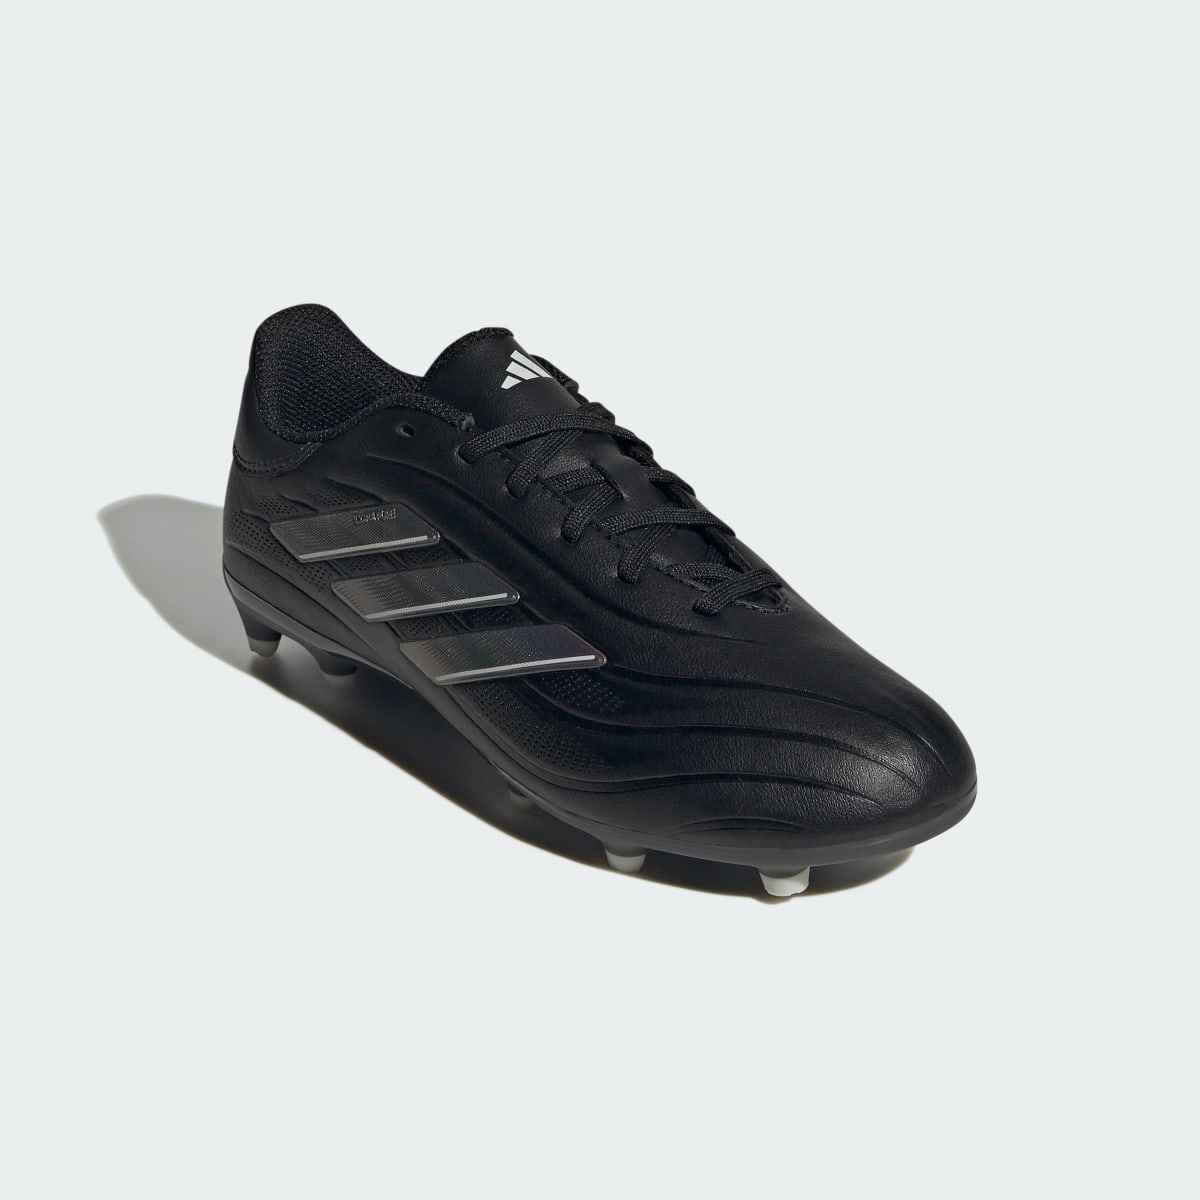 Adidas Copa Pure II League Firm Ground Cleats. 5